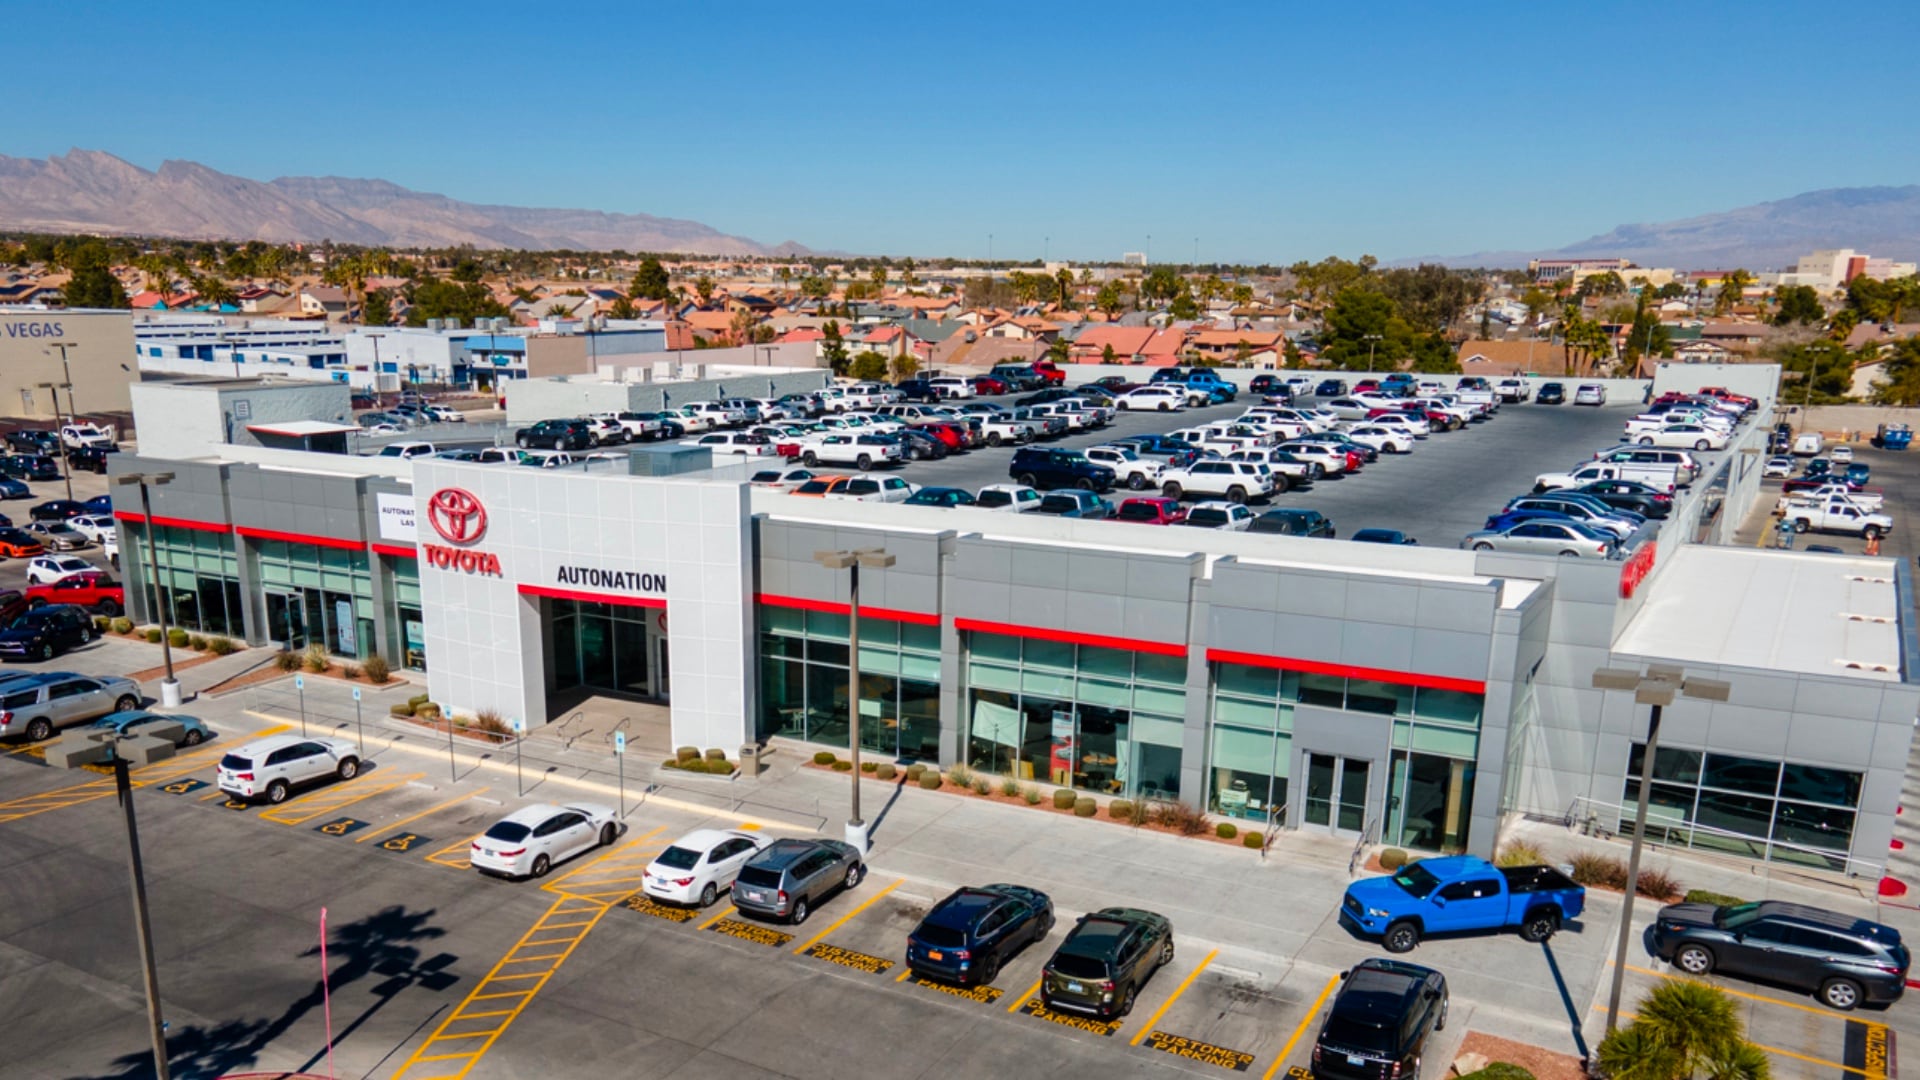 Overhead exterior view of AutoNation Toyota Las Vegas. The building is grey and white and has some large windows. Many vehicles can be seen parked near the building and on the roof. Mountains are visible in the distance.